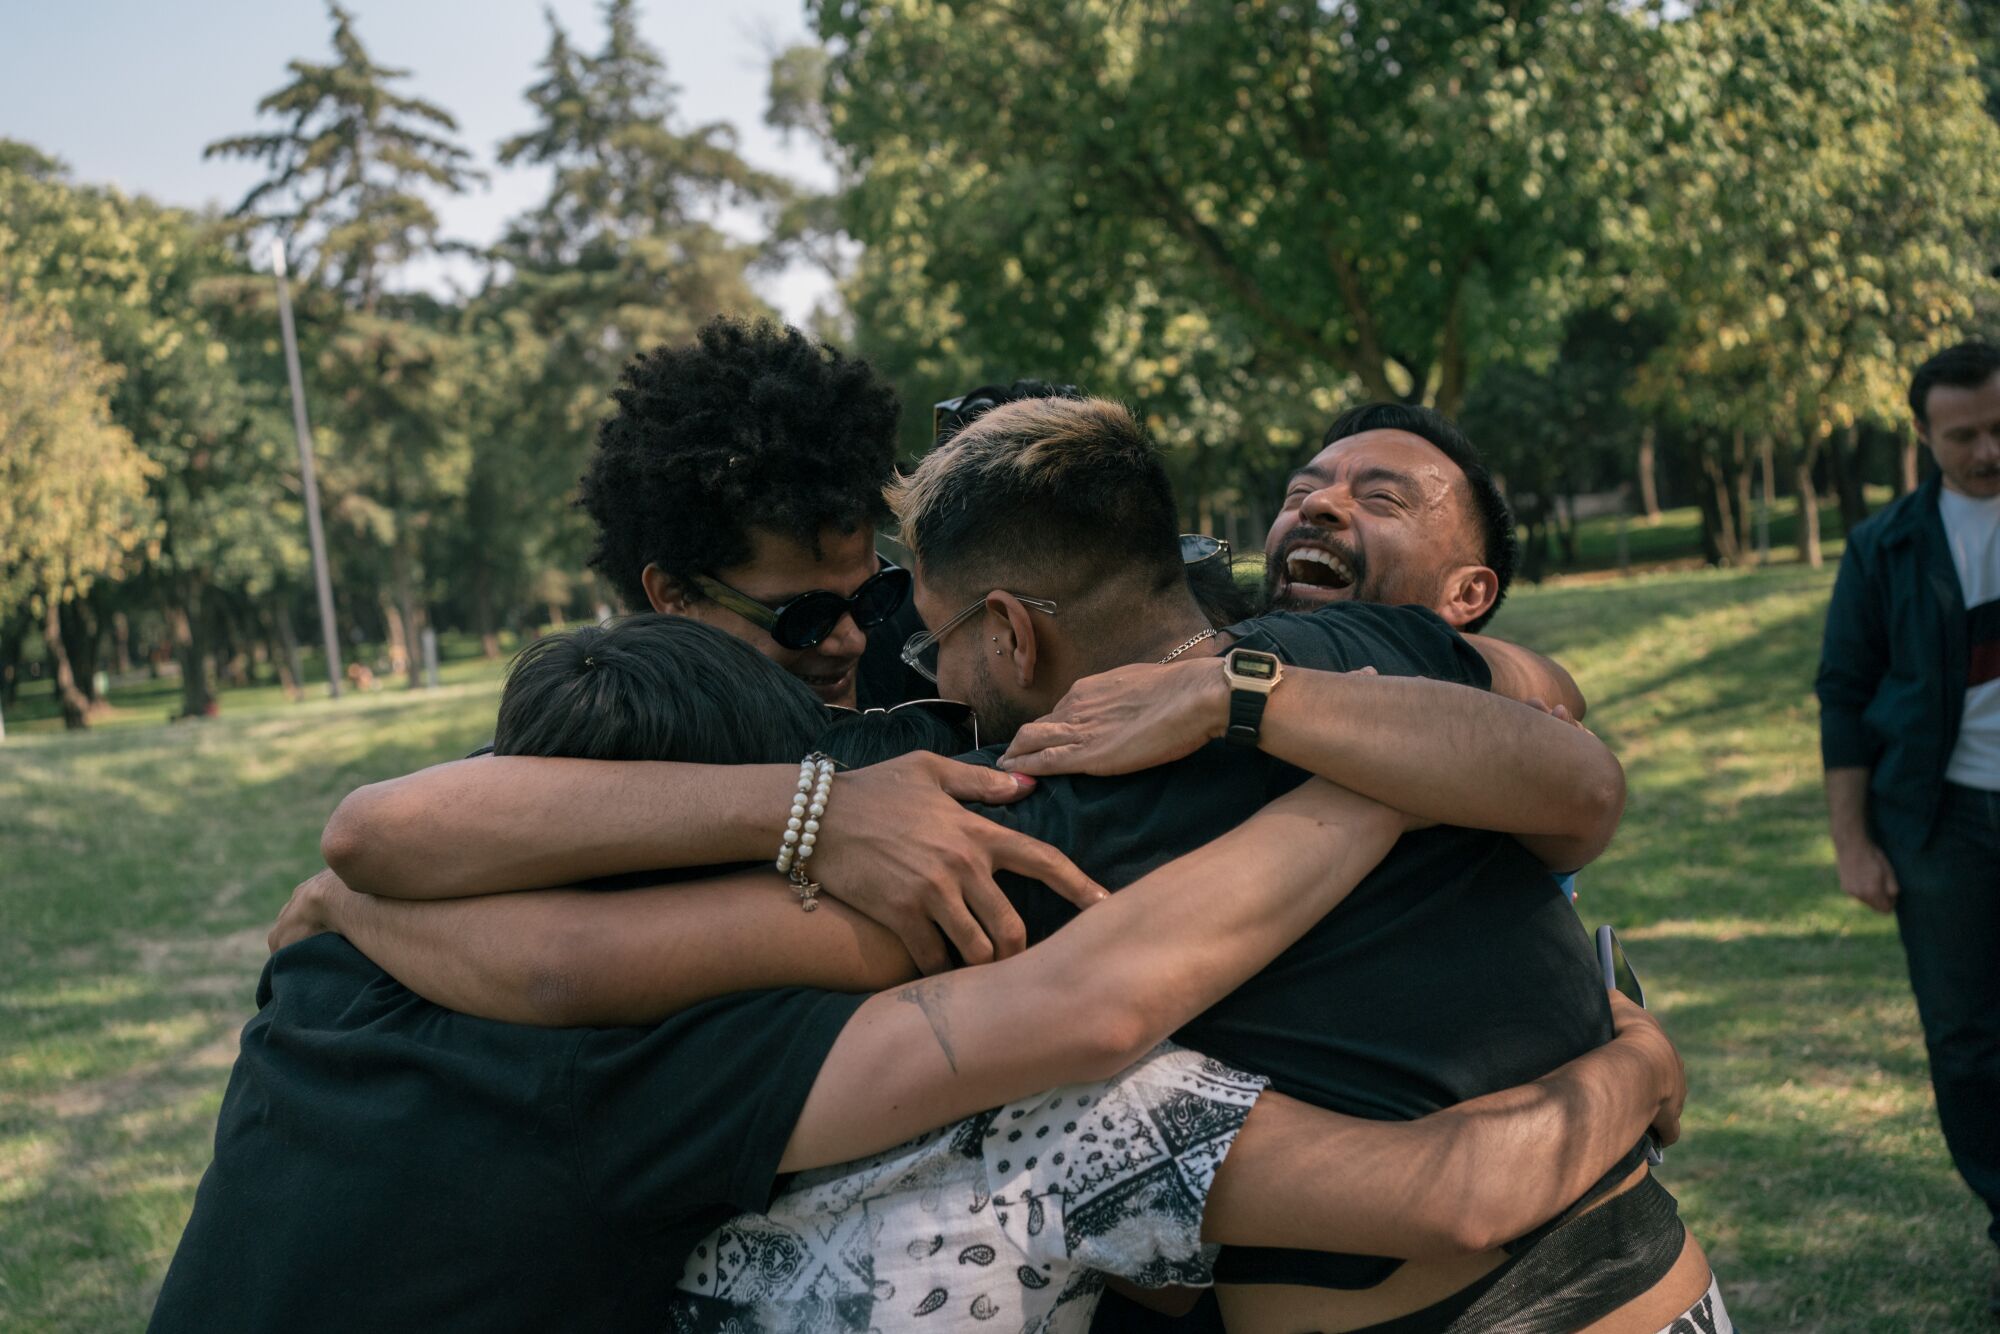 Several people share a group hug in a park setting 